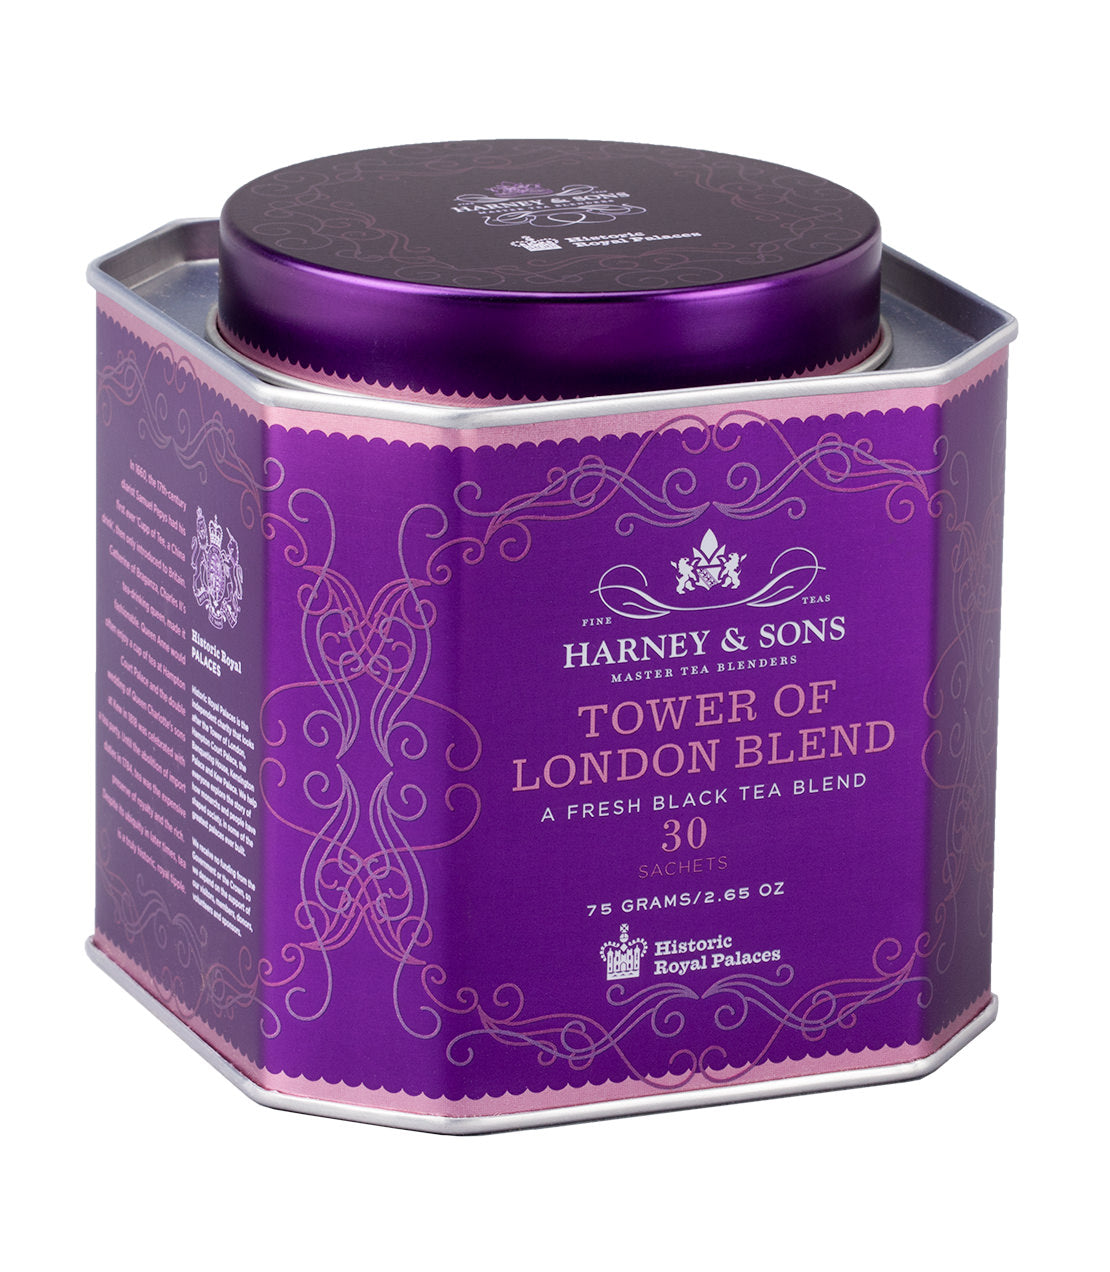 Tower of London Blend, HRP Tin of 30 Sachets